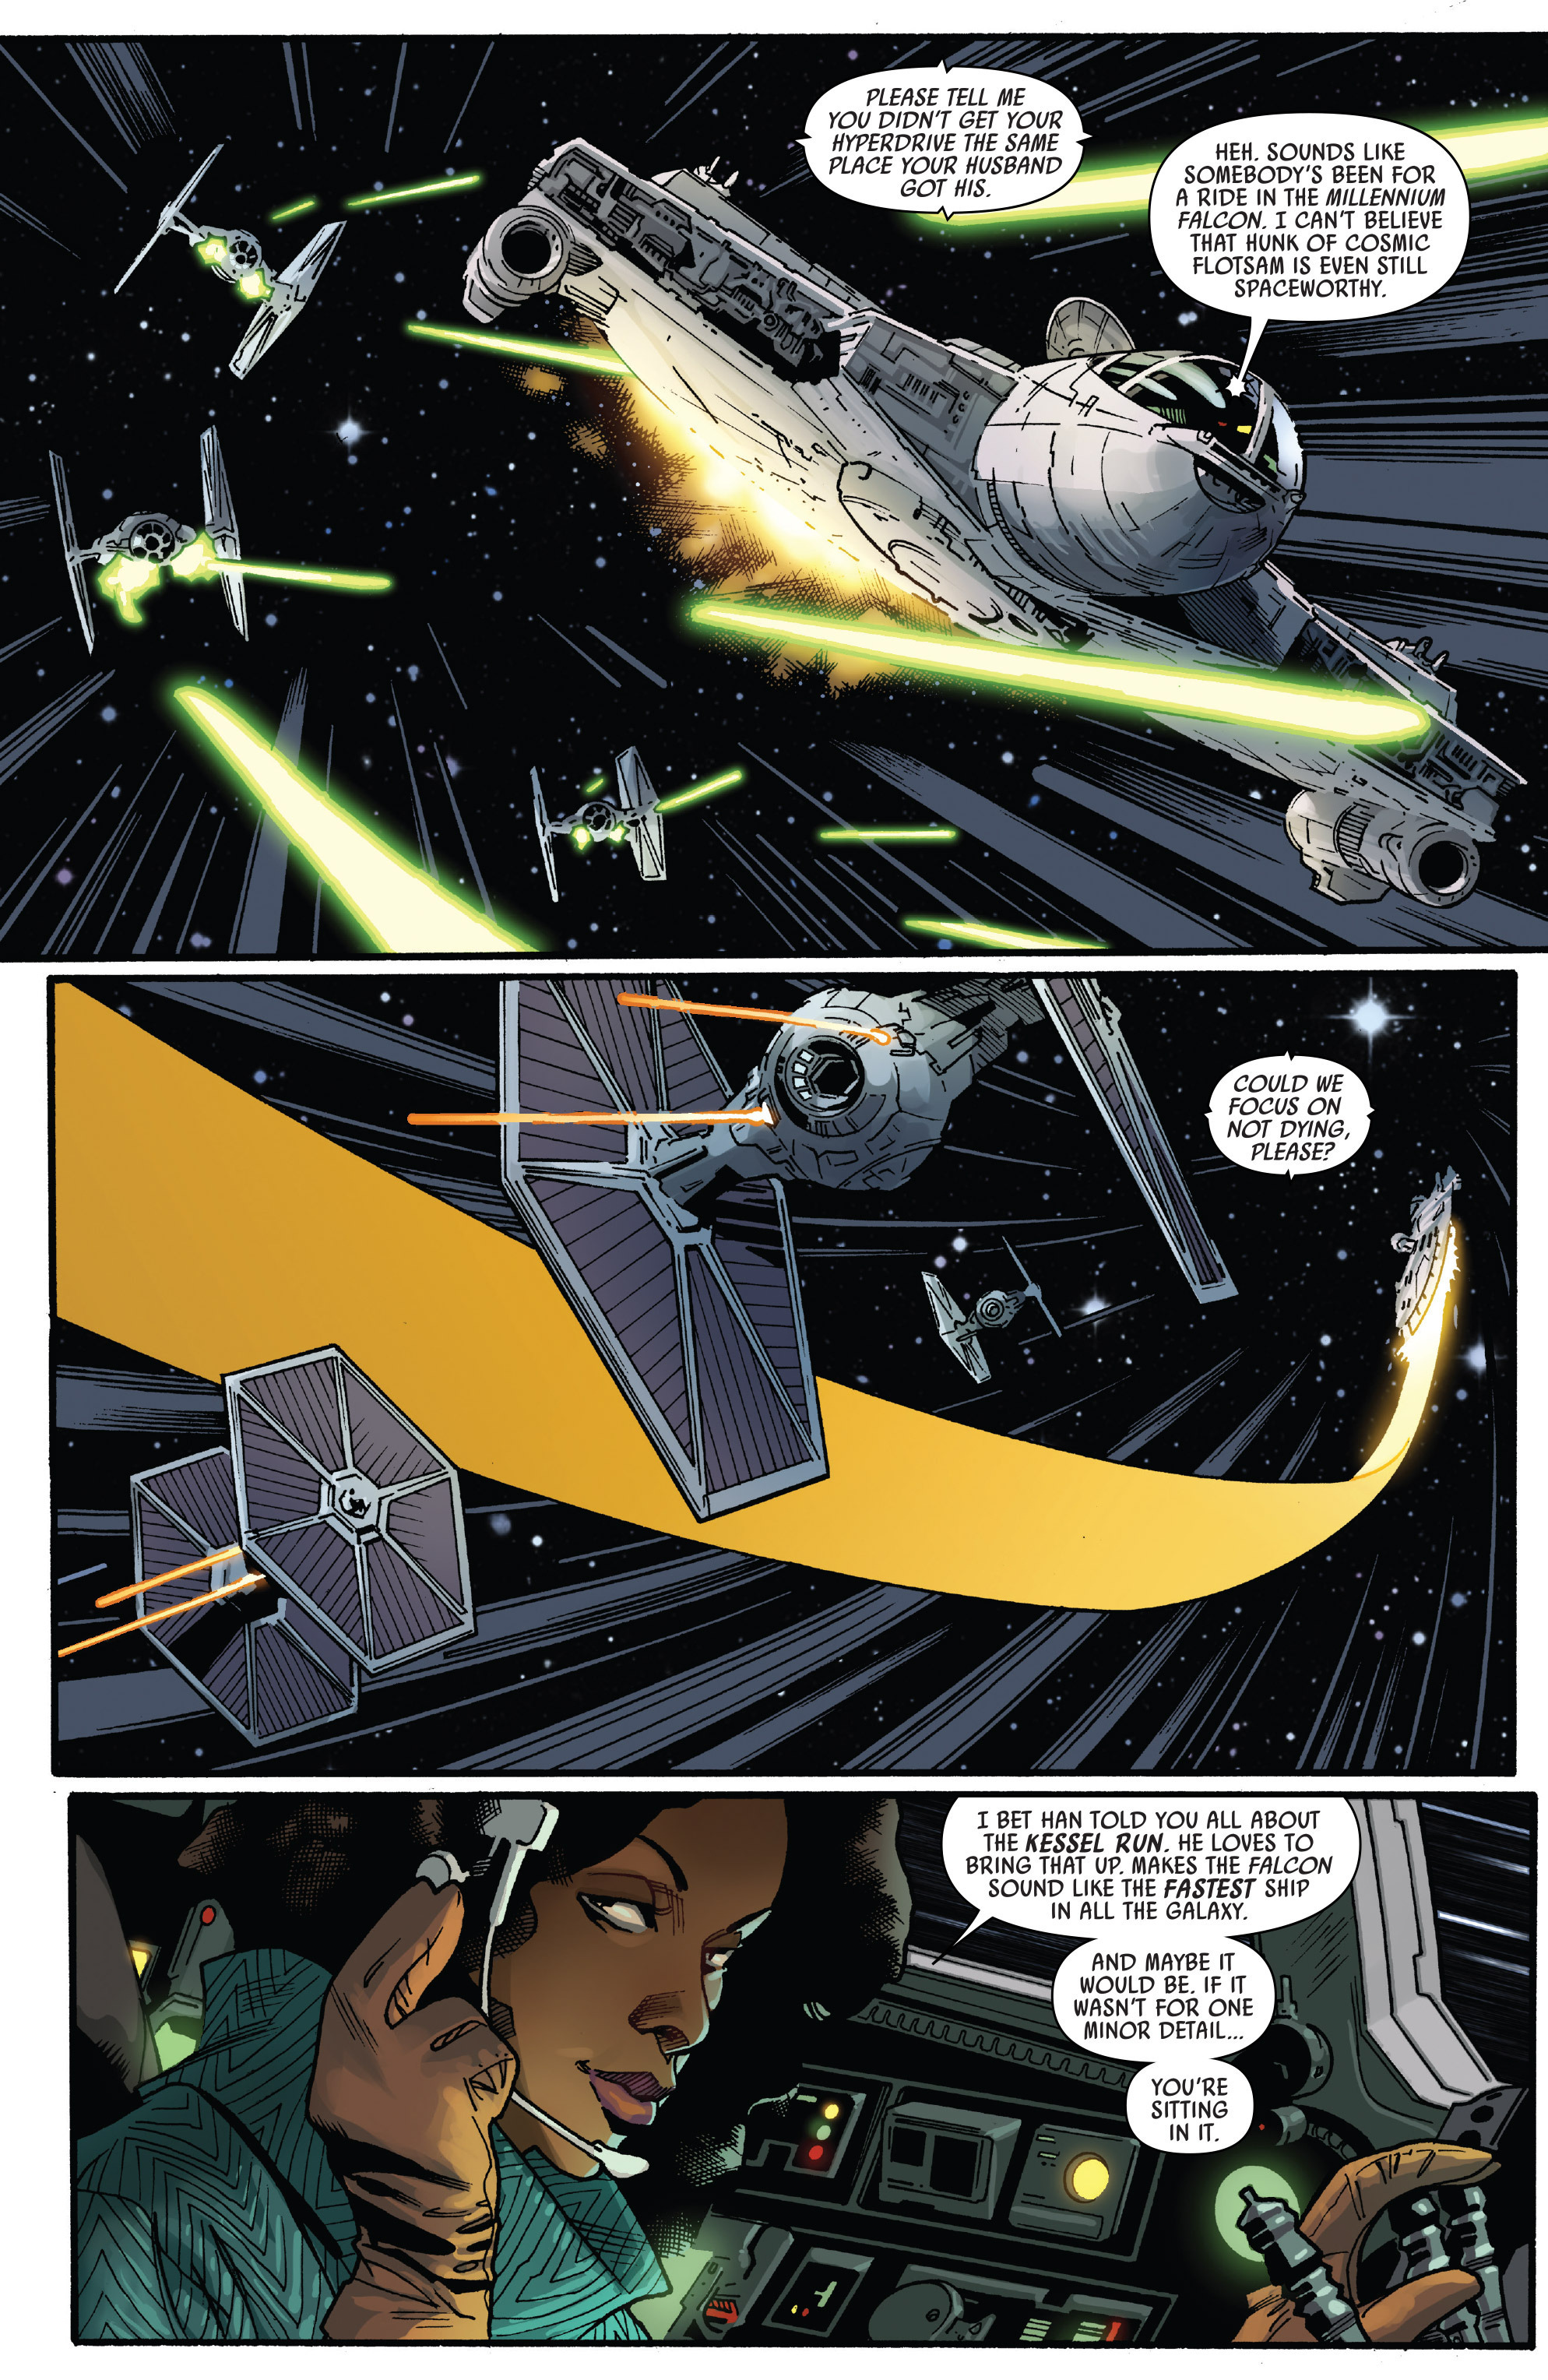 Star Wars (2015-): Chapter 10 - Page 4